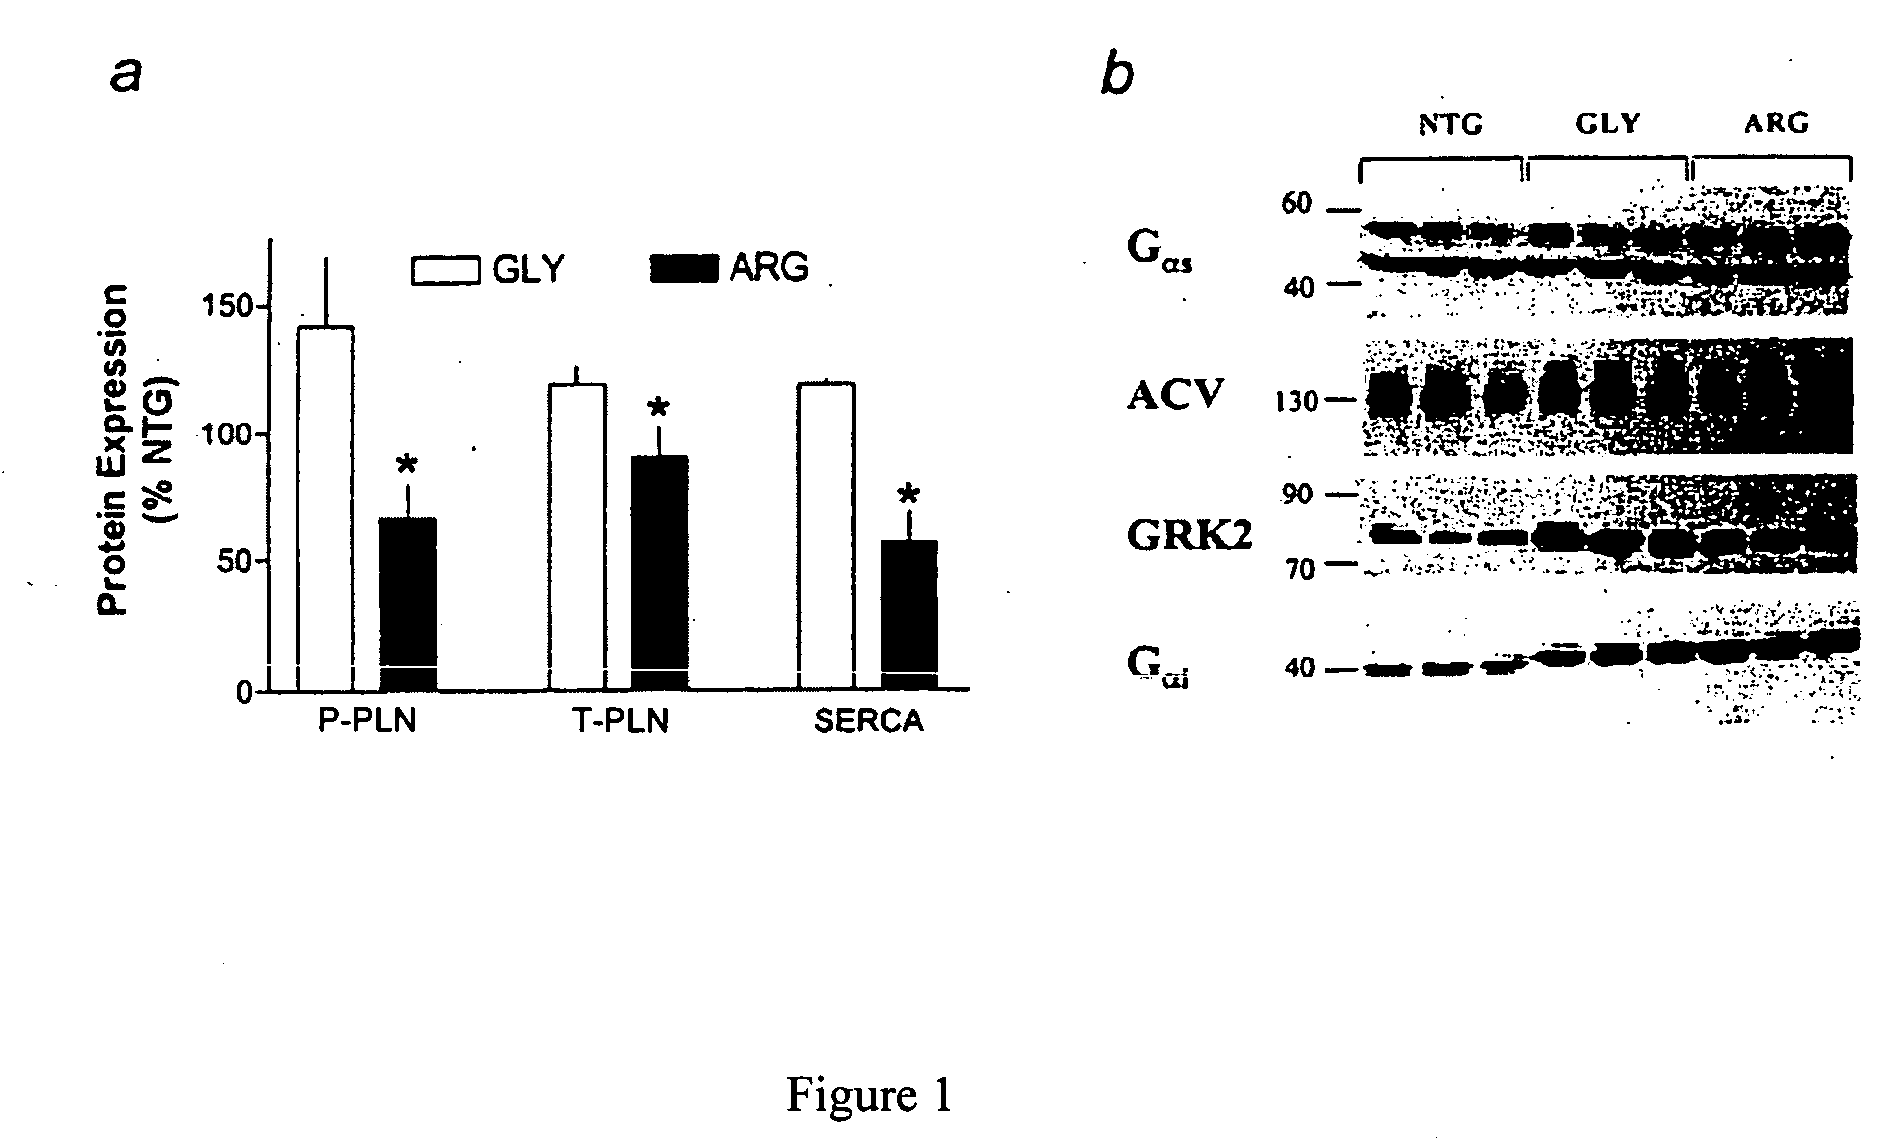 Methods for diagnosis, prediction and treatment of heart failure and other cardiac conditions based on beta1-adrenergic receptor polymorphism